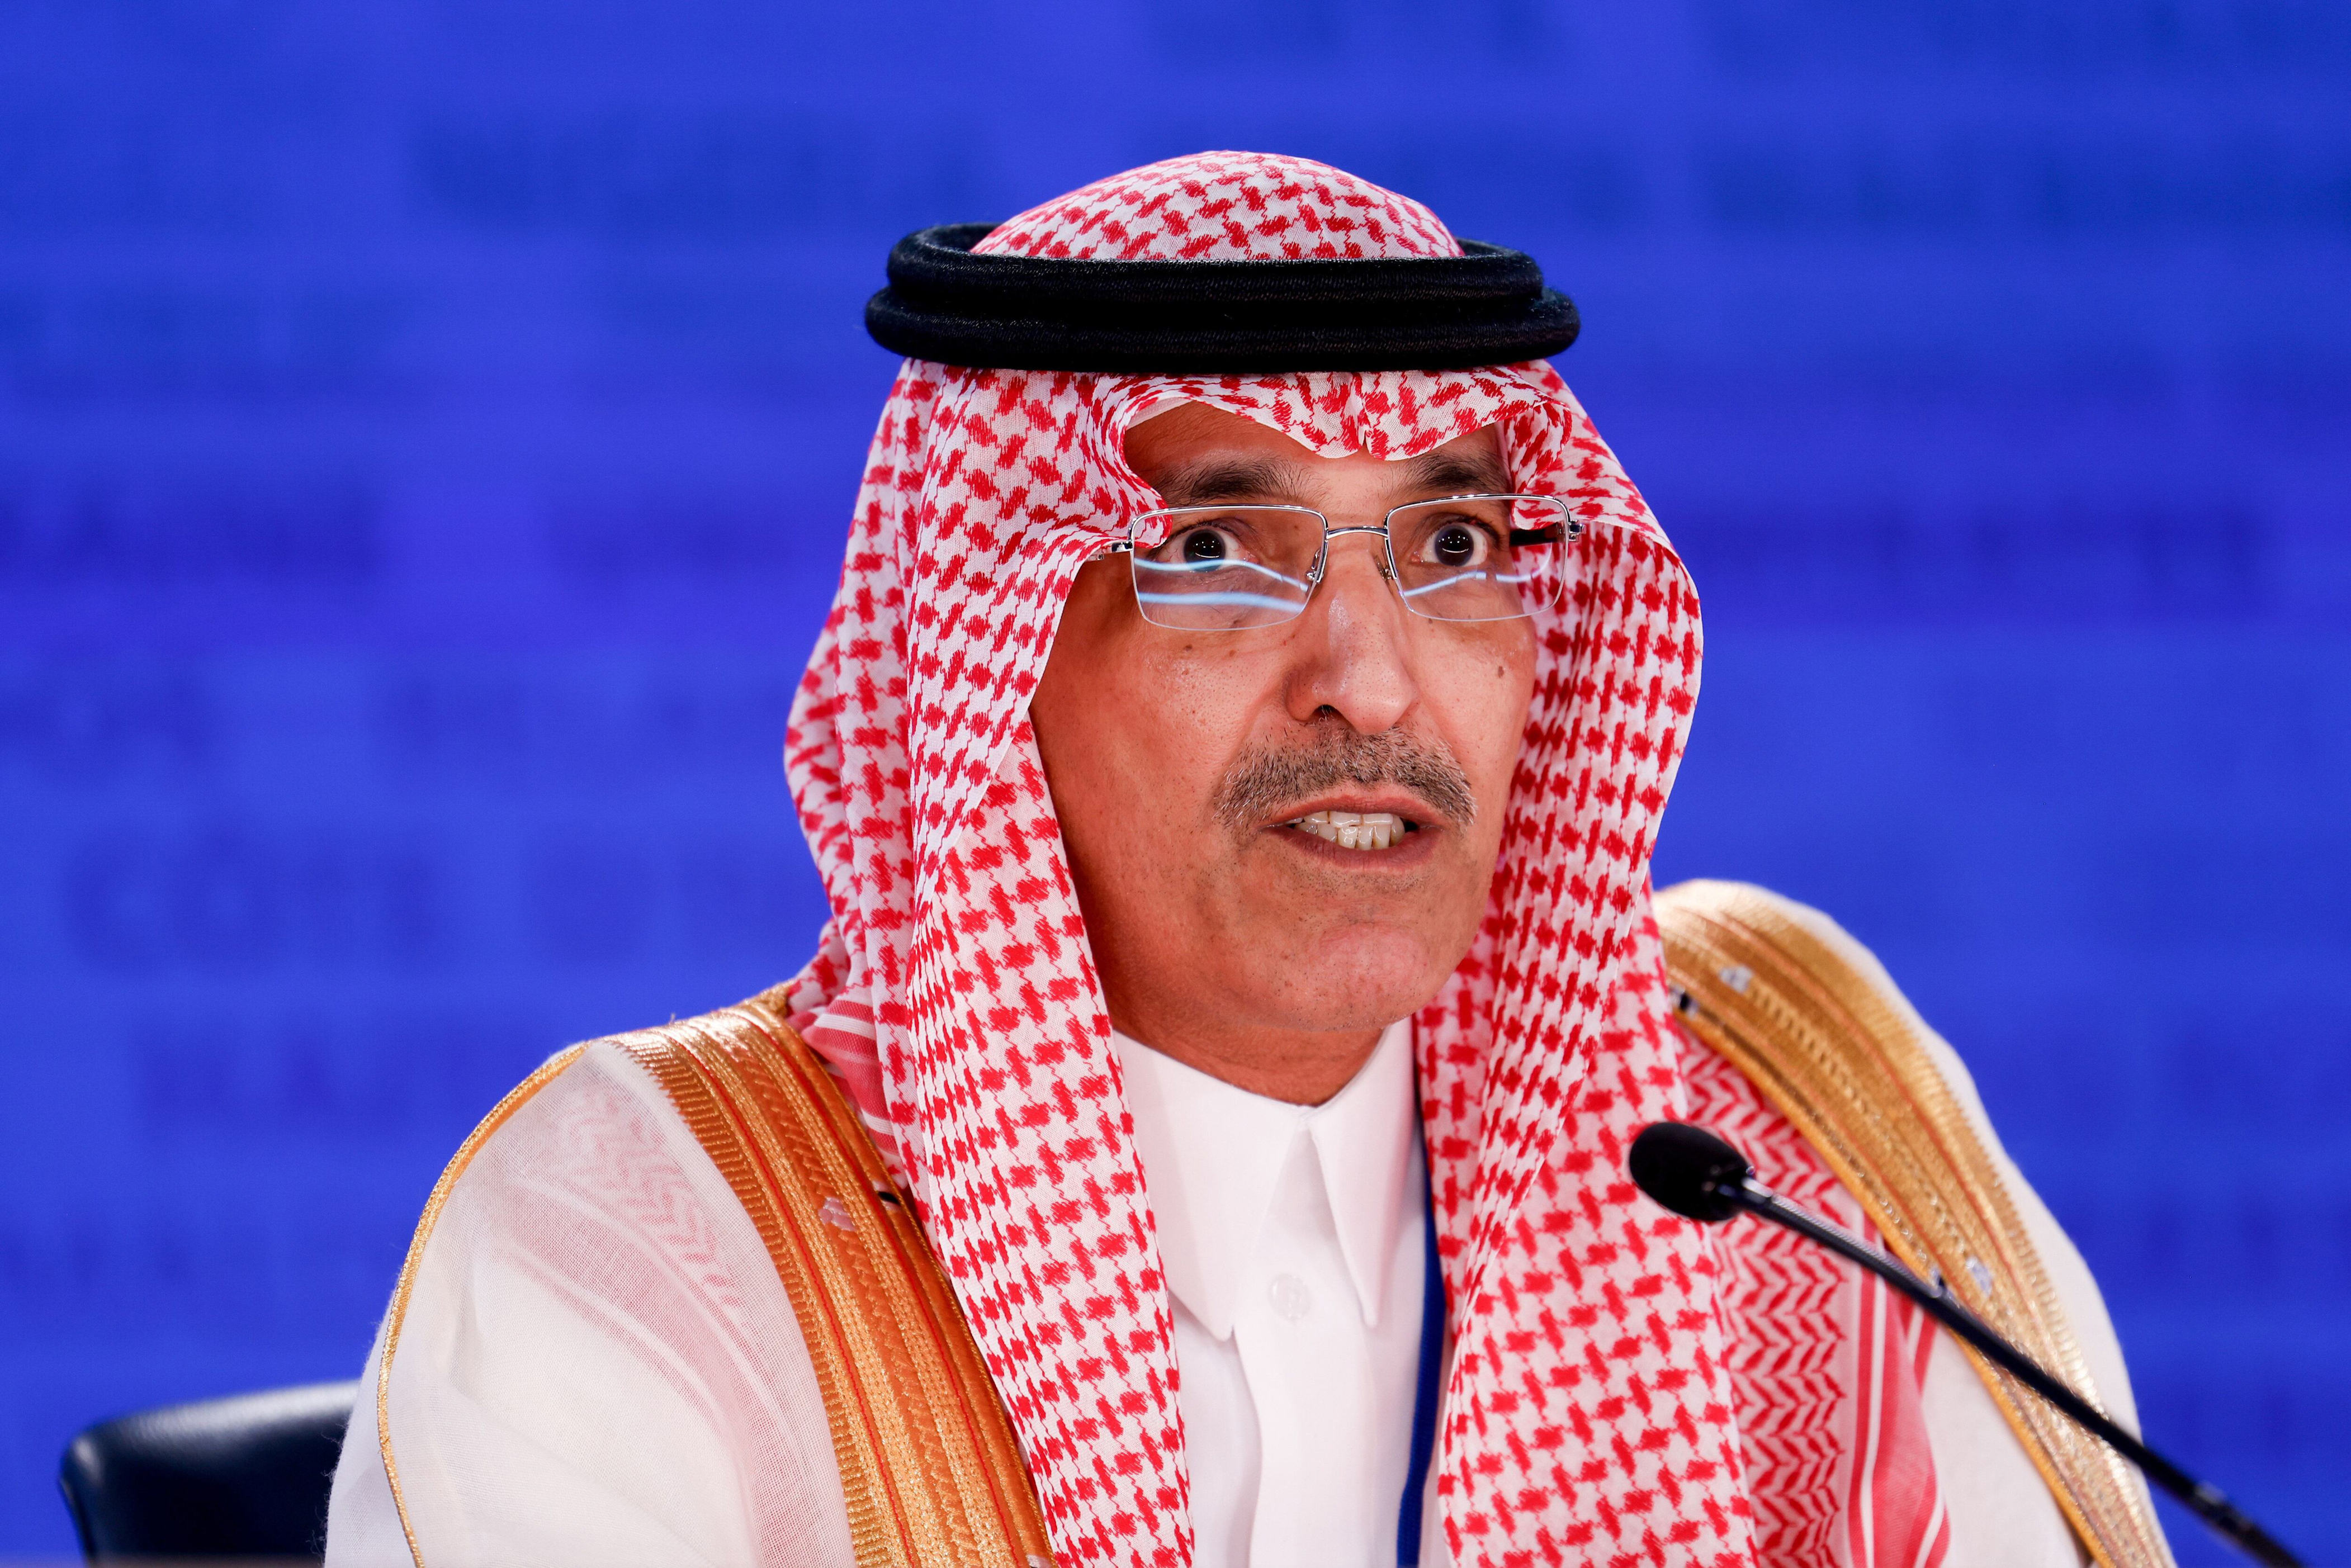 saudi arabia considers scaling down vision 2030 projects amid economic challenges